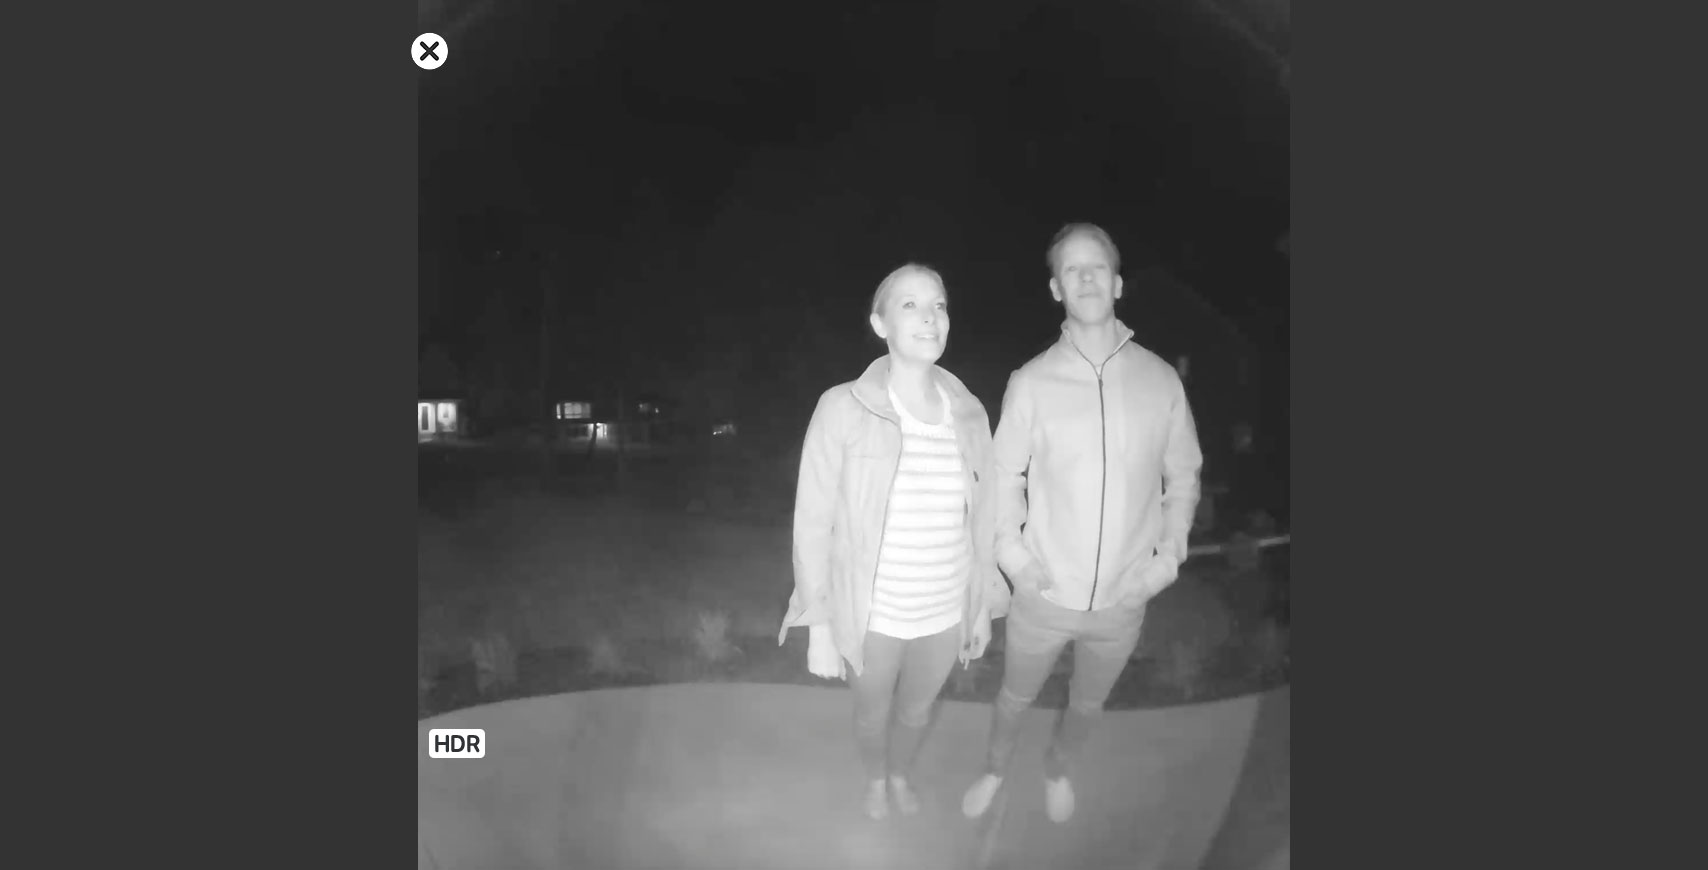 Smart phone displaying clear picture of person at door with night vision